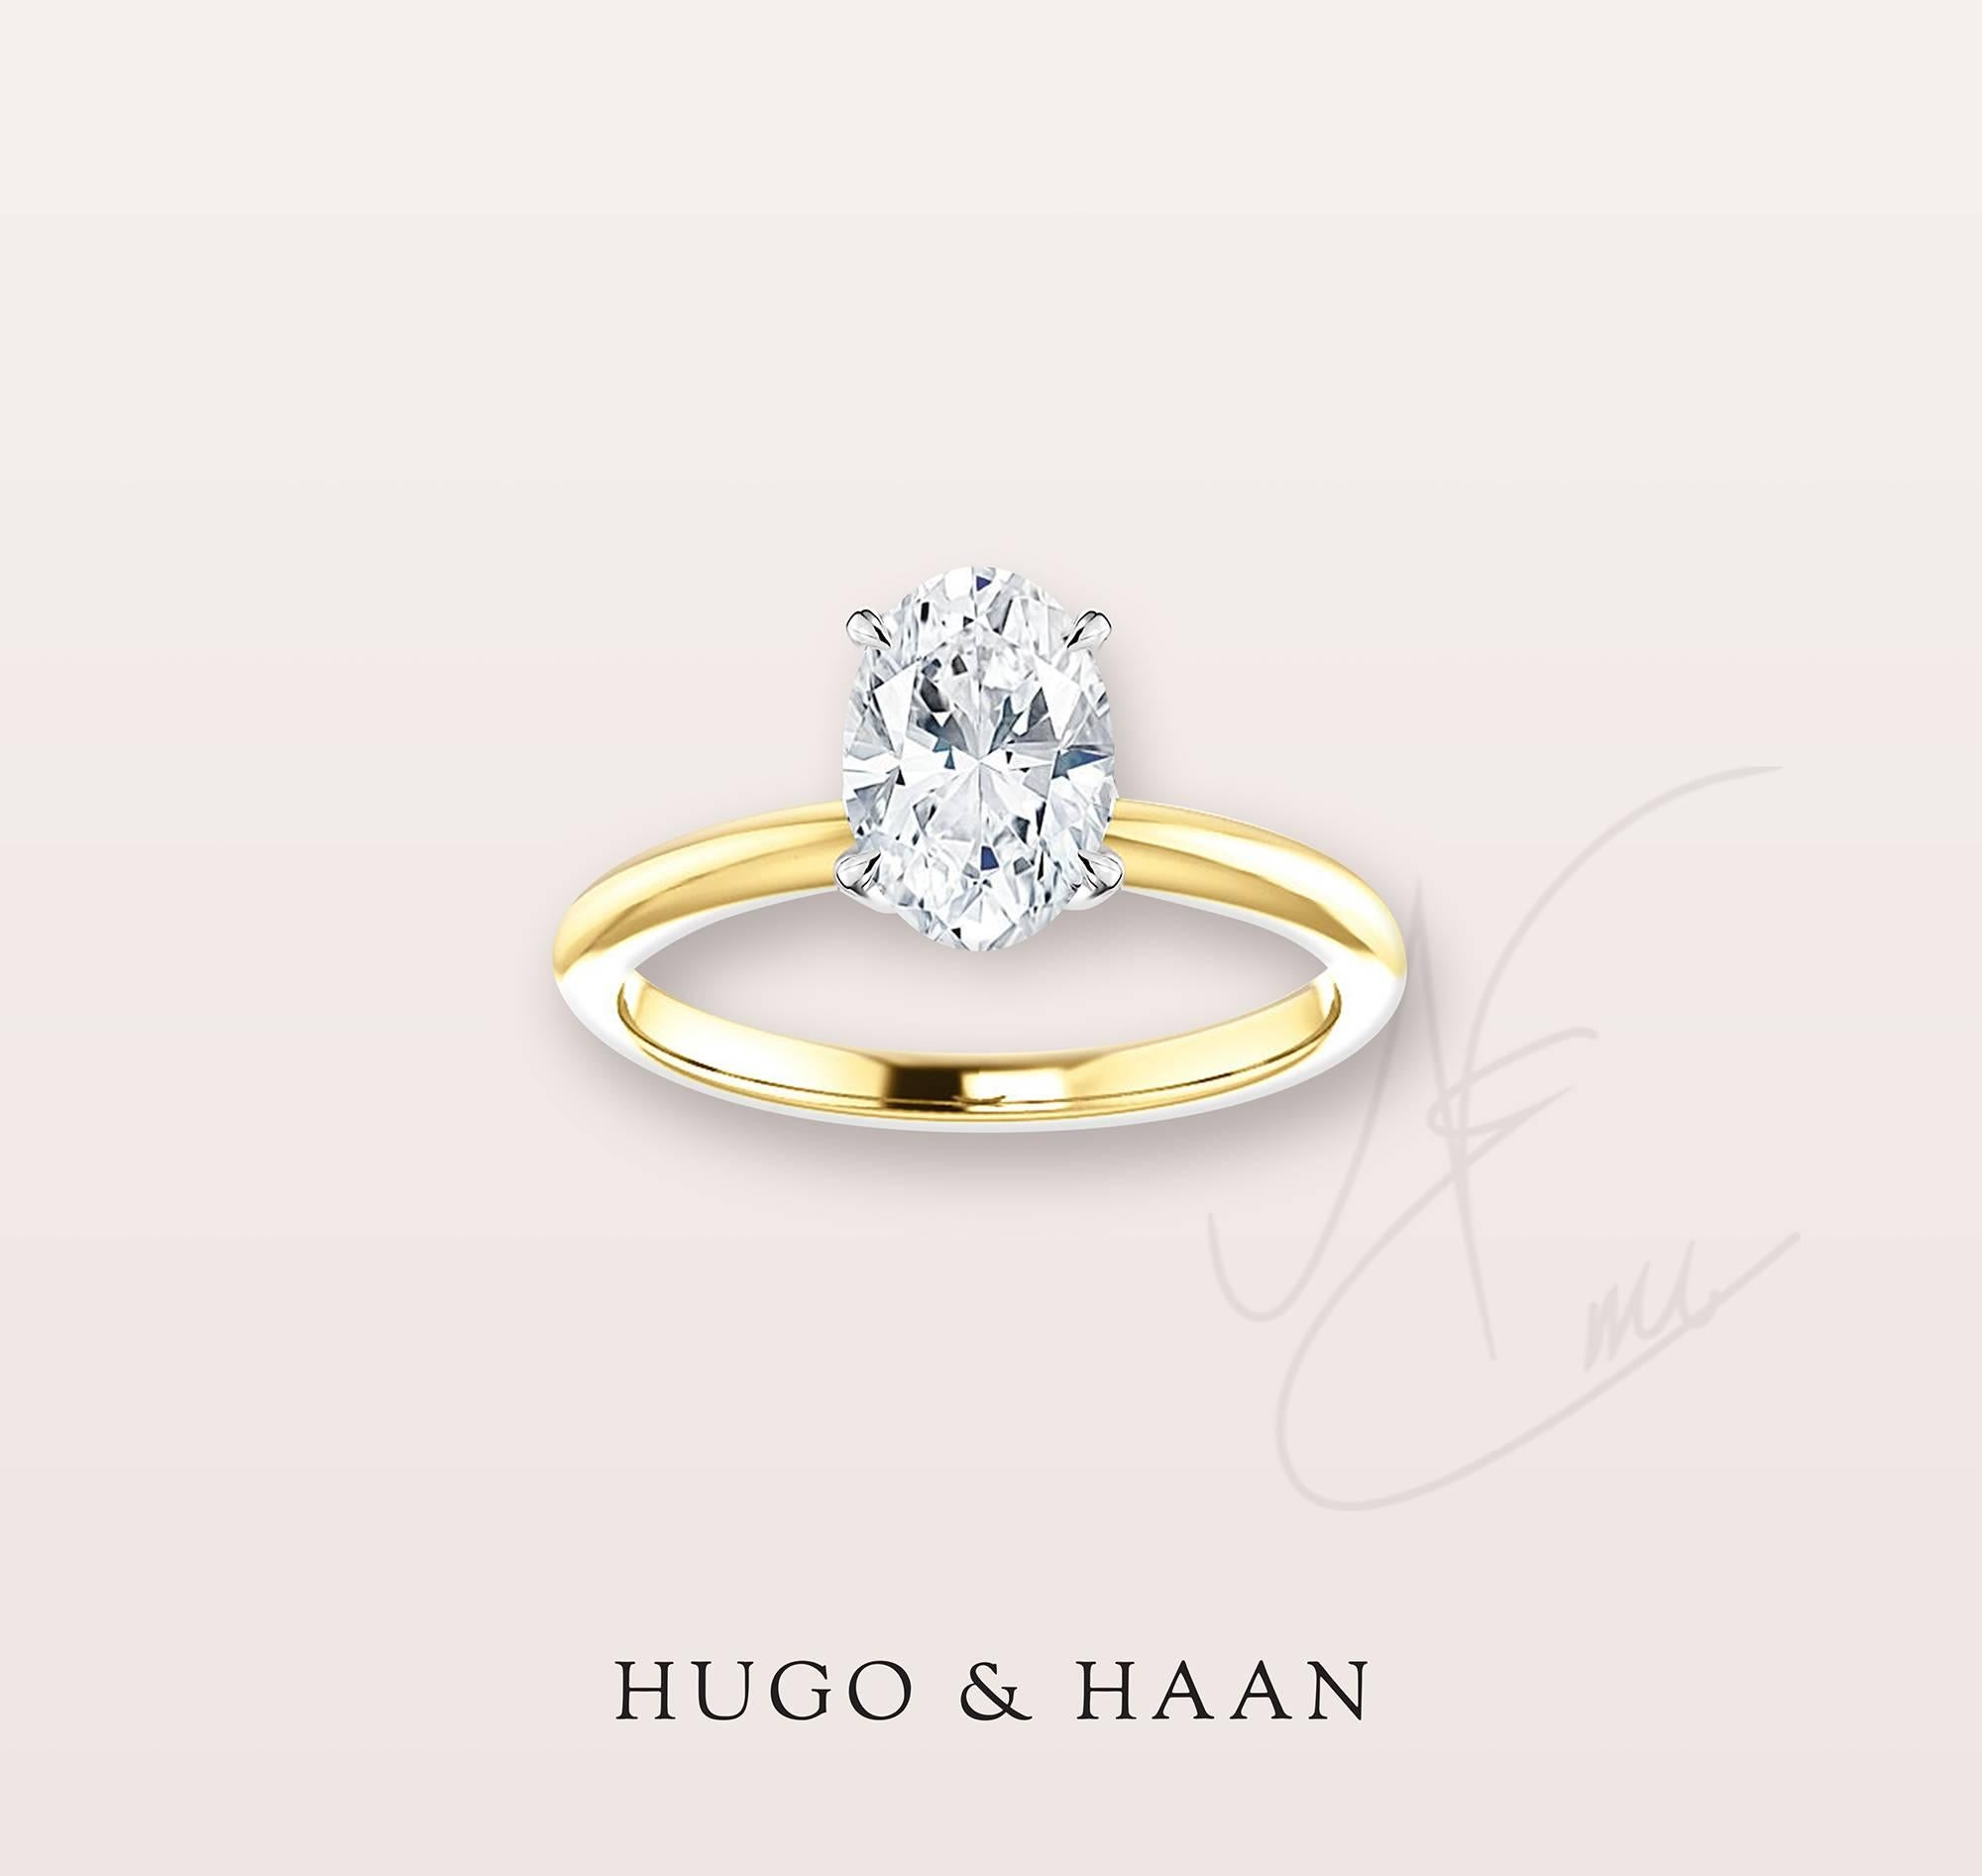 Details:

Material : 18k Yellow Gold and Platinum
Principle Gemstone : GIA Certified 1.05ct Oval Brilliant Cut Diamond (F colour/ VVS1 clarity)
Customizable: Yes

Options to customize: 

Metals available : Platinum /18kt Yellow Gold / 18kt White